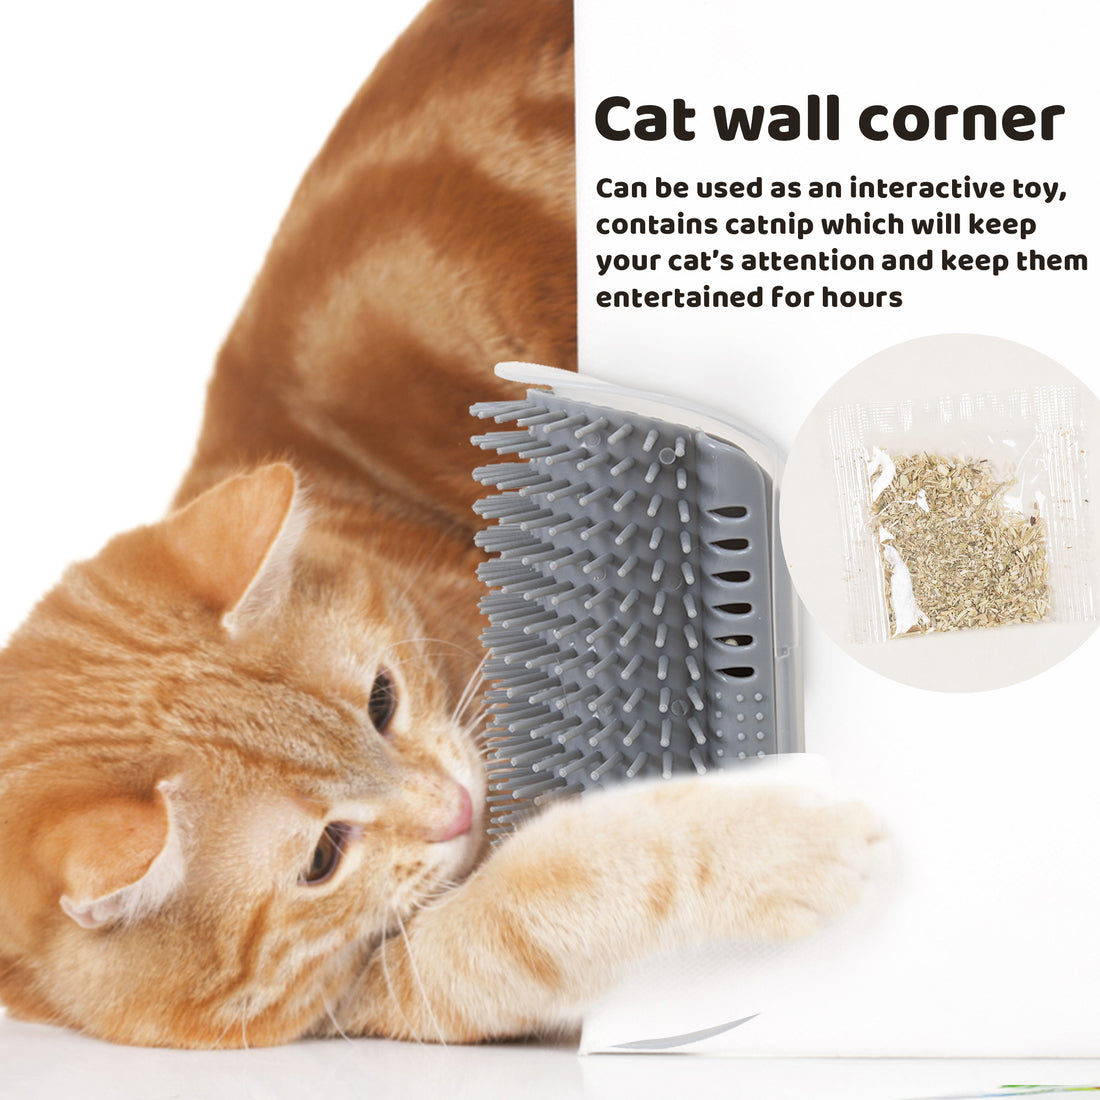 Adorable cat happily using the Cat Wall Corner Brush, Scratcher,  and Rubbing Comb for self-grooming and relaxation. Check our our instruction manual for step-by-step installation instructions.